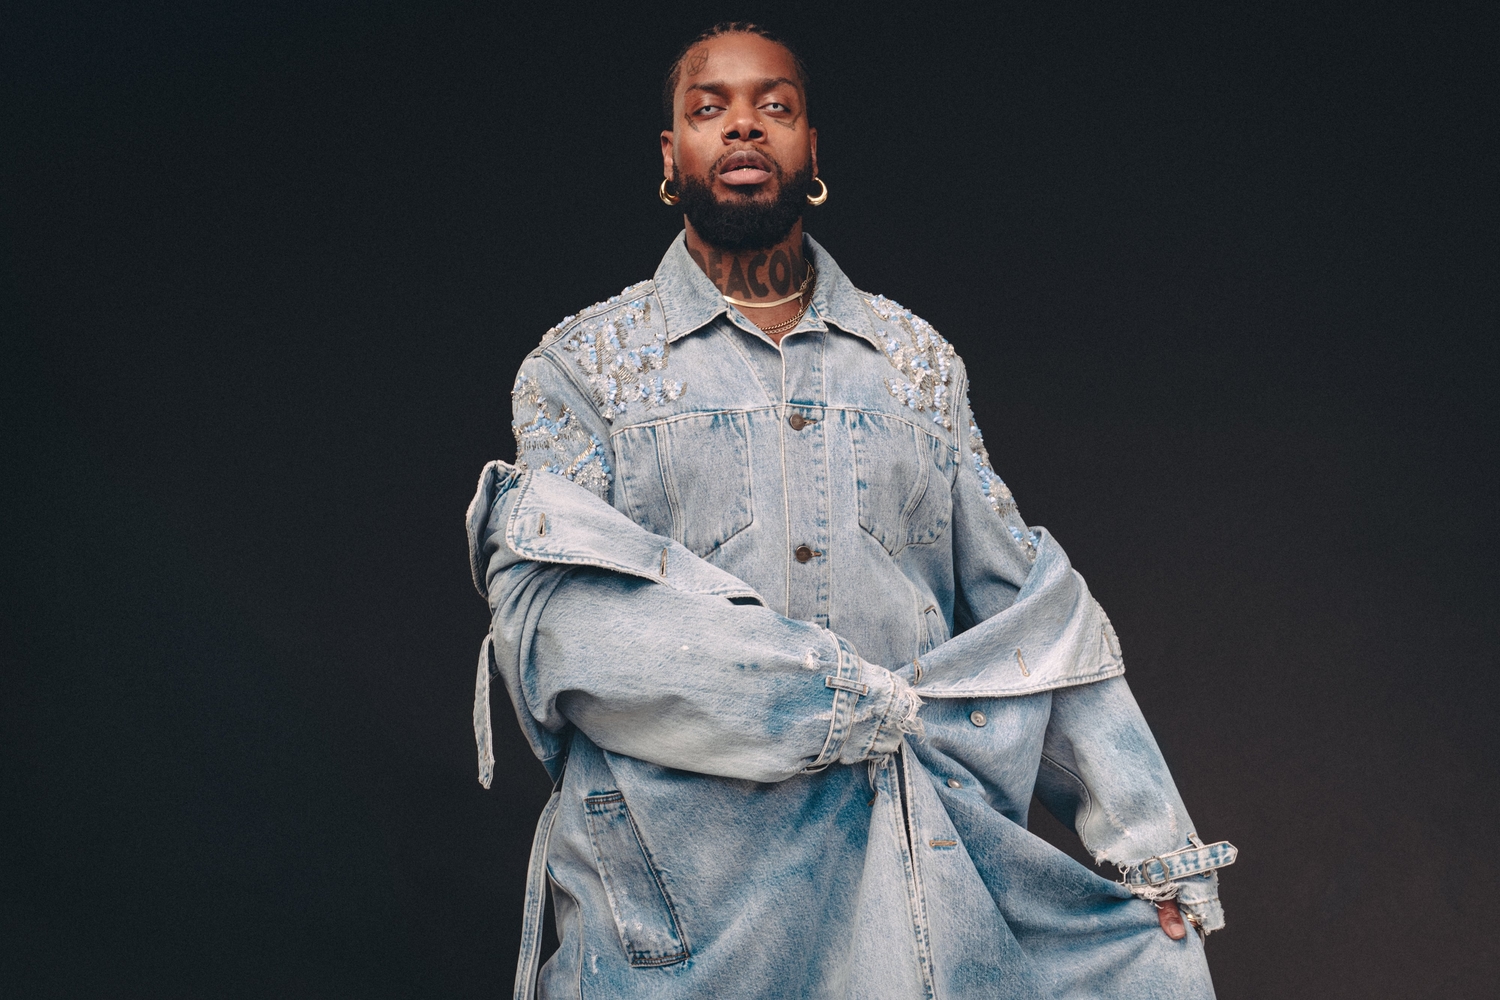 serpentwithfeet on the immediacy and intimacy of his new album, 'GRIP'